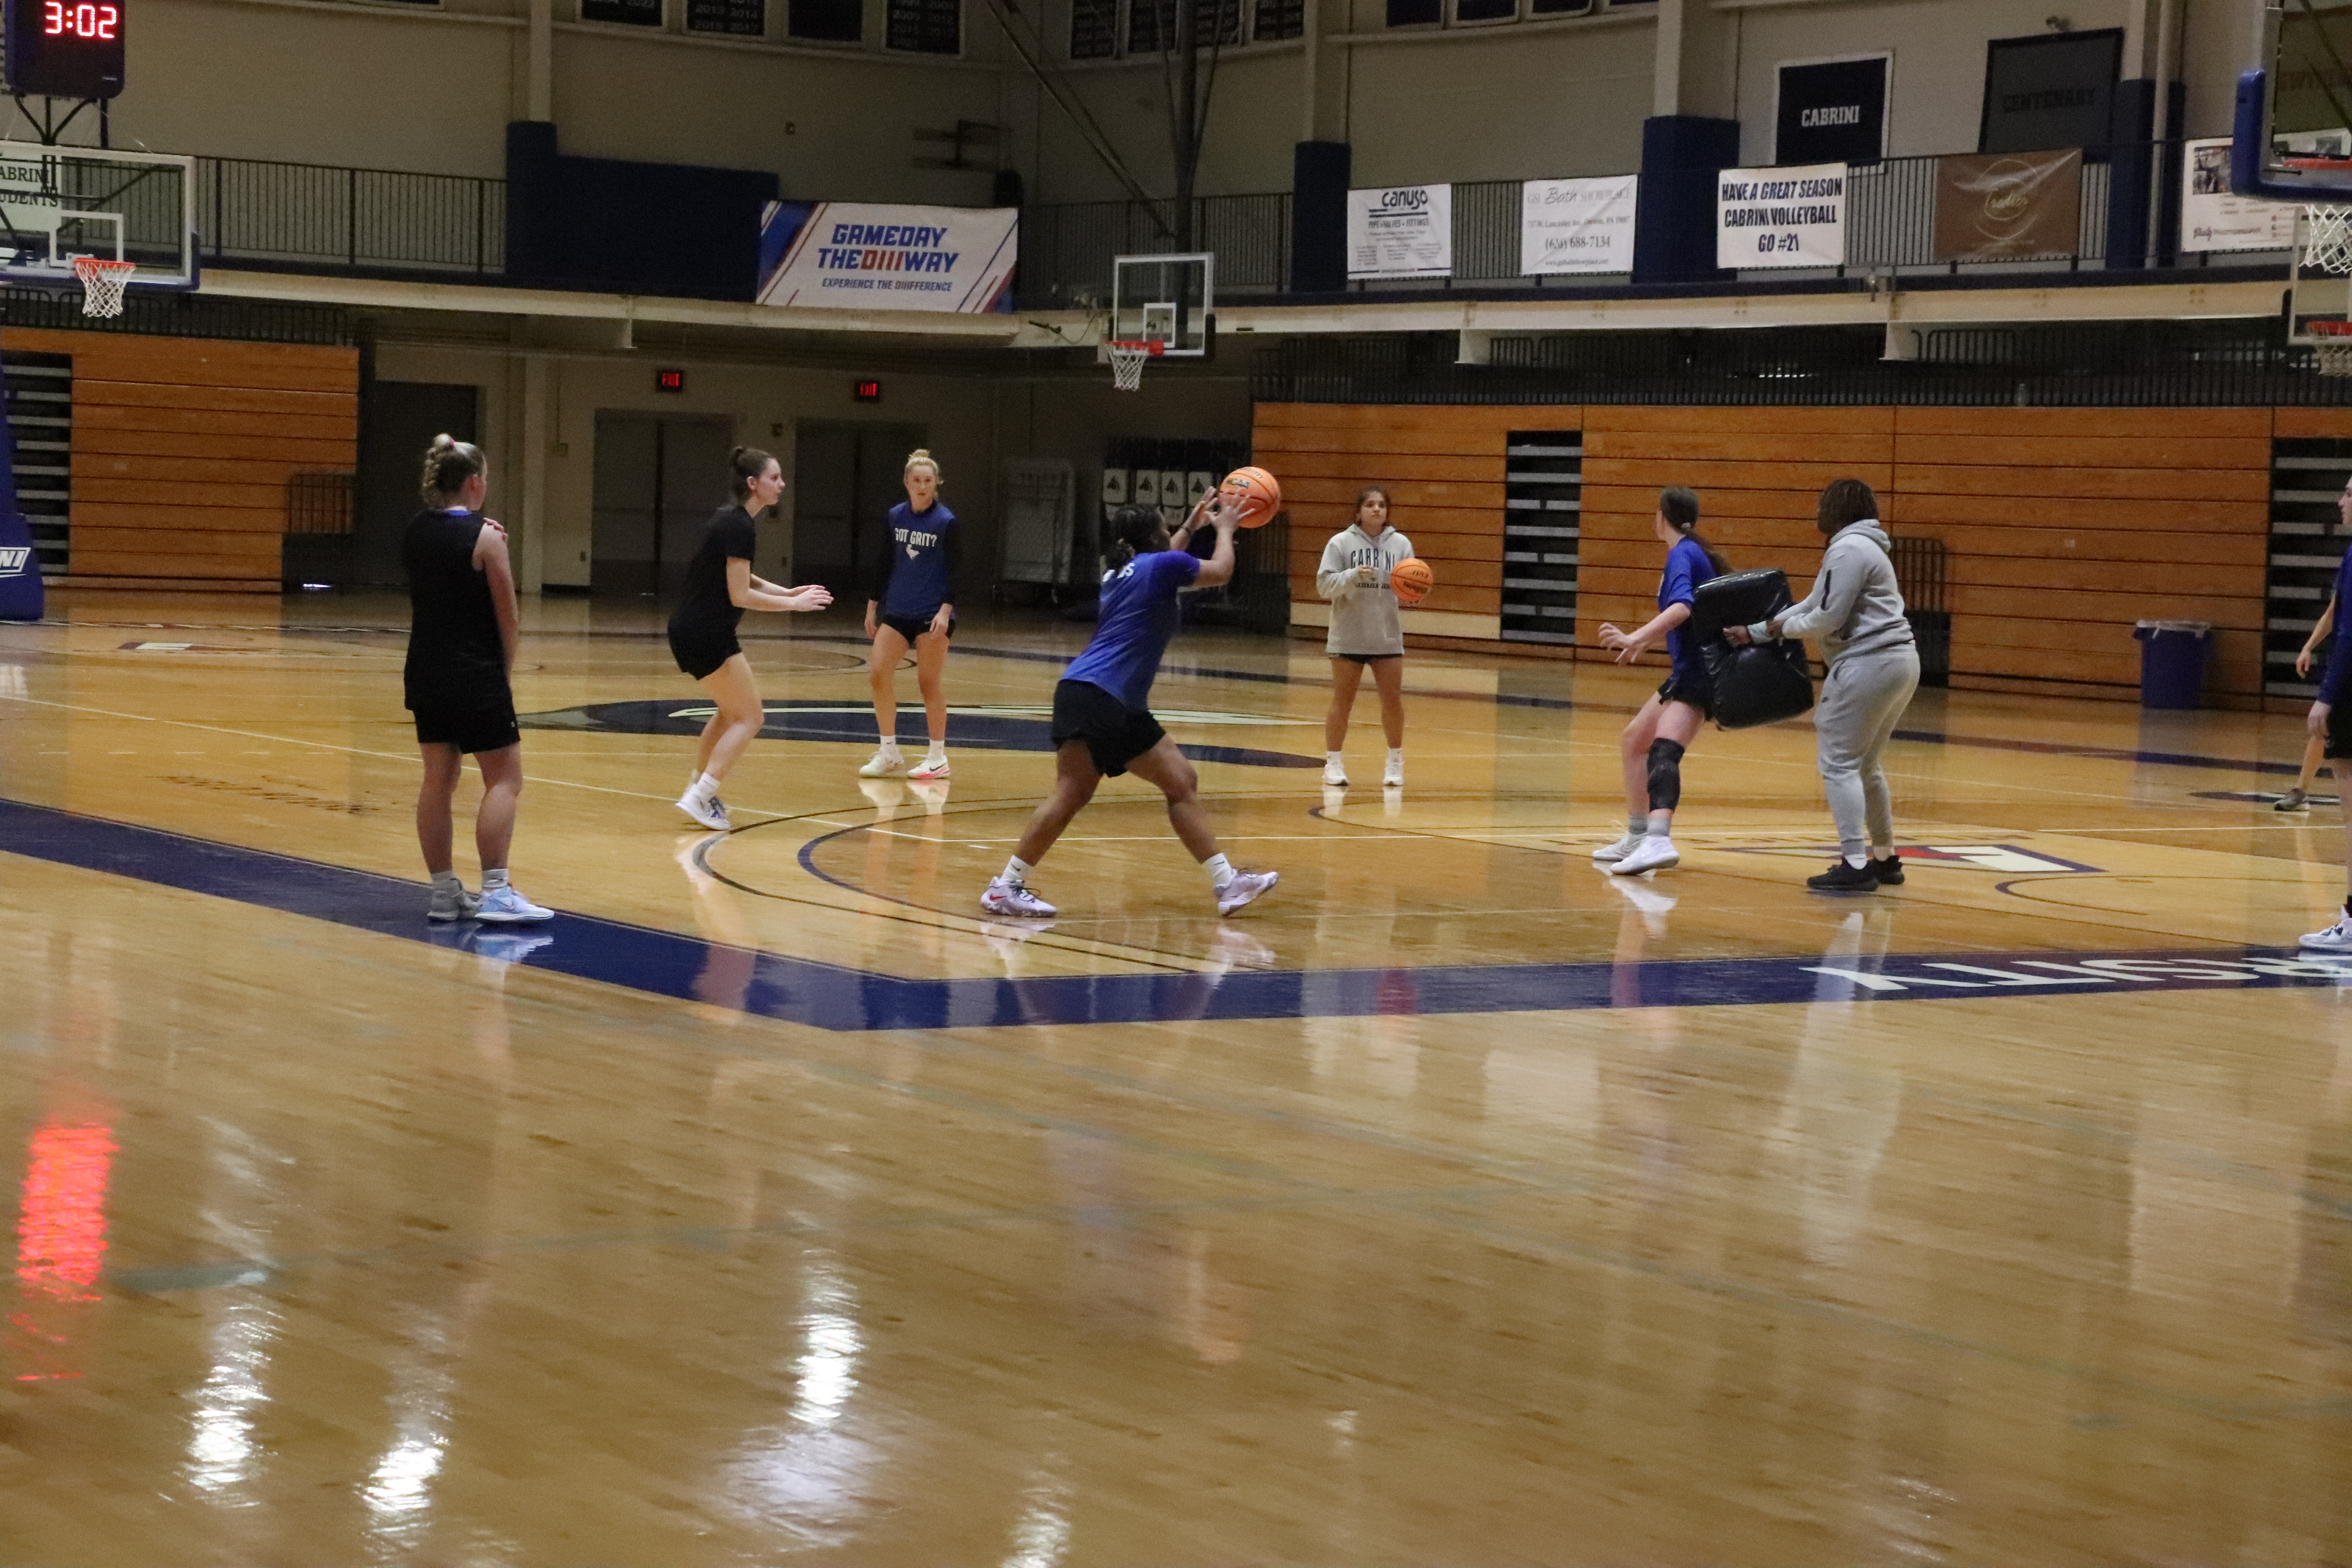 The Cabrini women's basketball team practices in the Dixon gym.